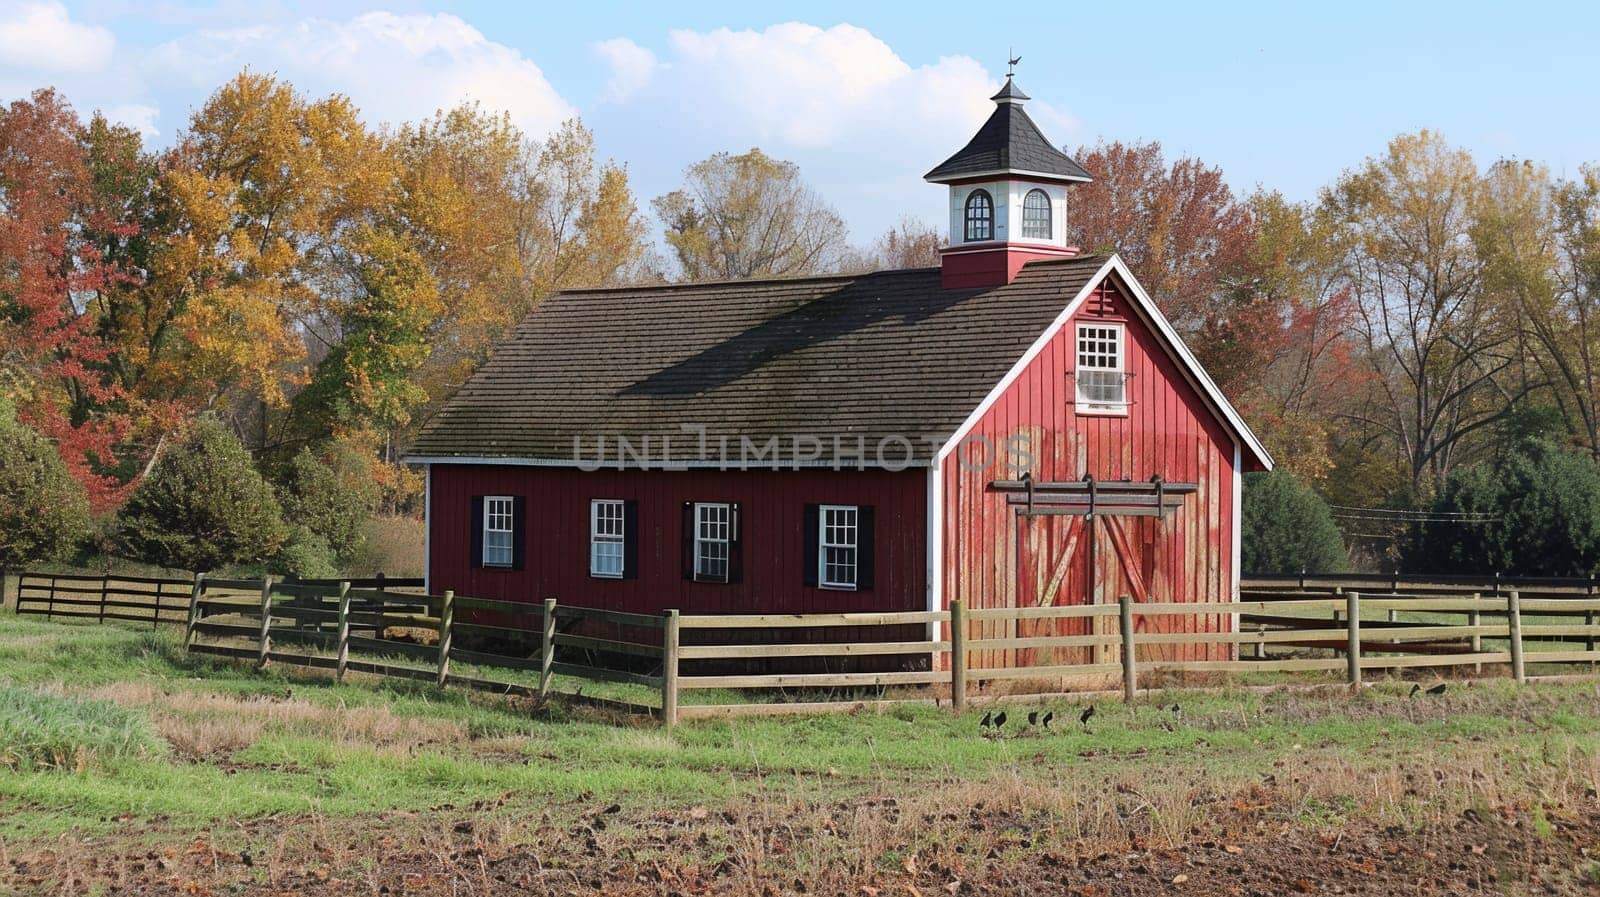 A small red barn with a steeple in the middle of an open field, AI by starush